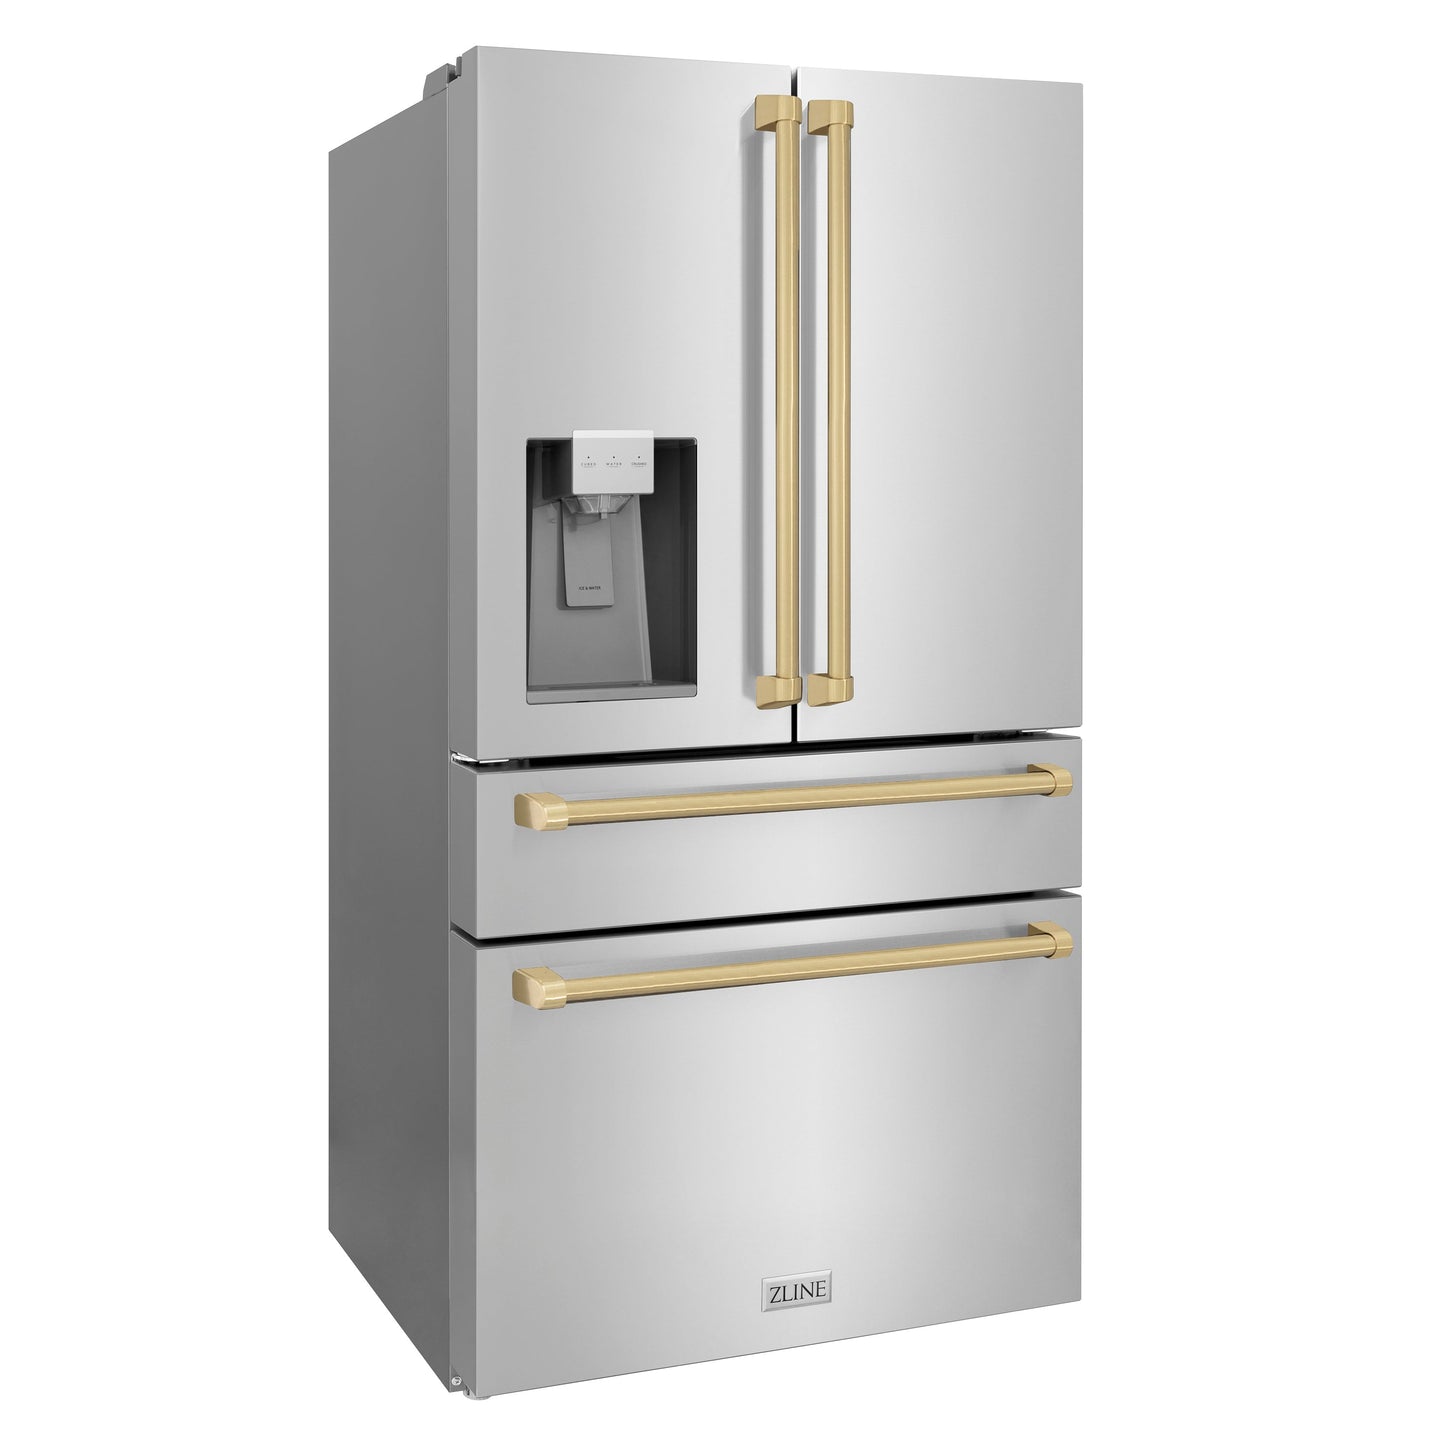 ZLINE 36 In. Autograph Refrigerator with Water and Ice Dispenser in Fingerprint Resistant Stainless Steel with Champagne Bronze Accents, RFMZ-W-36-CB